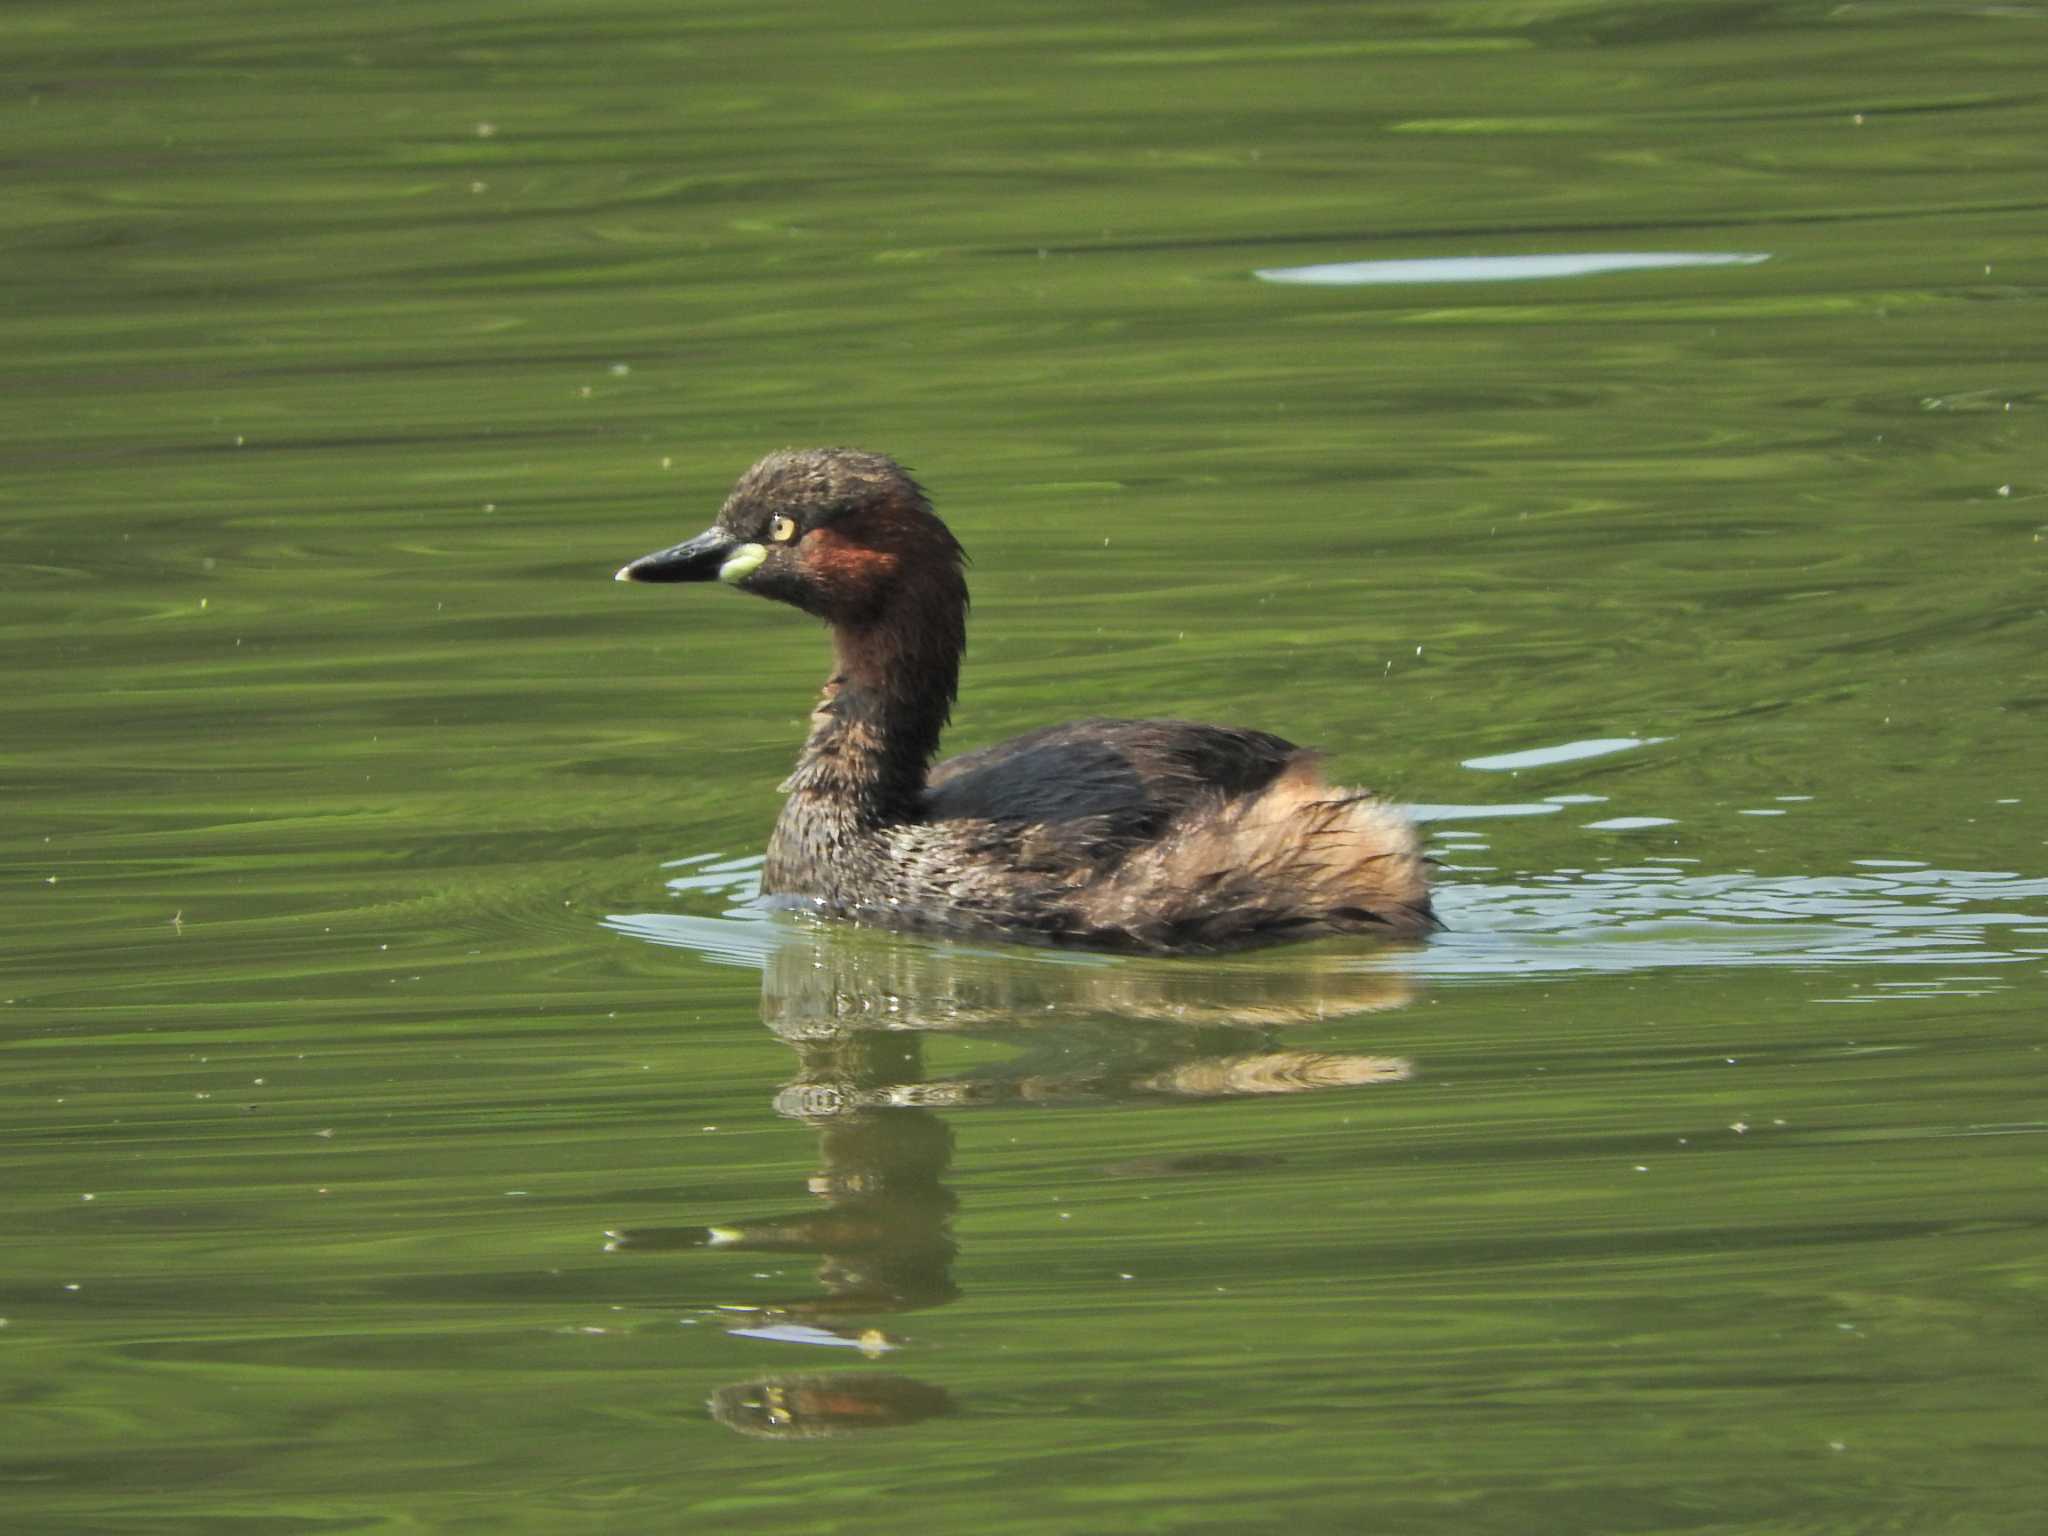 Photo of Little Grebe at Shakujii Park by chiba